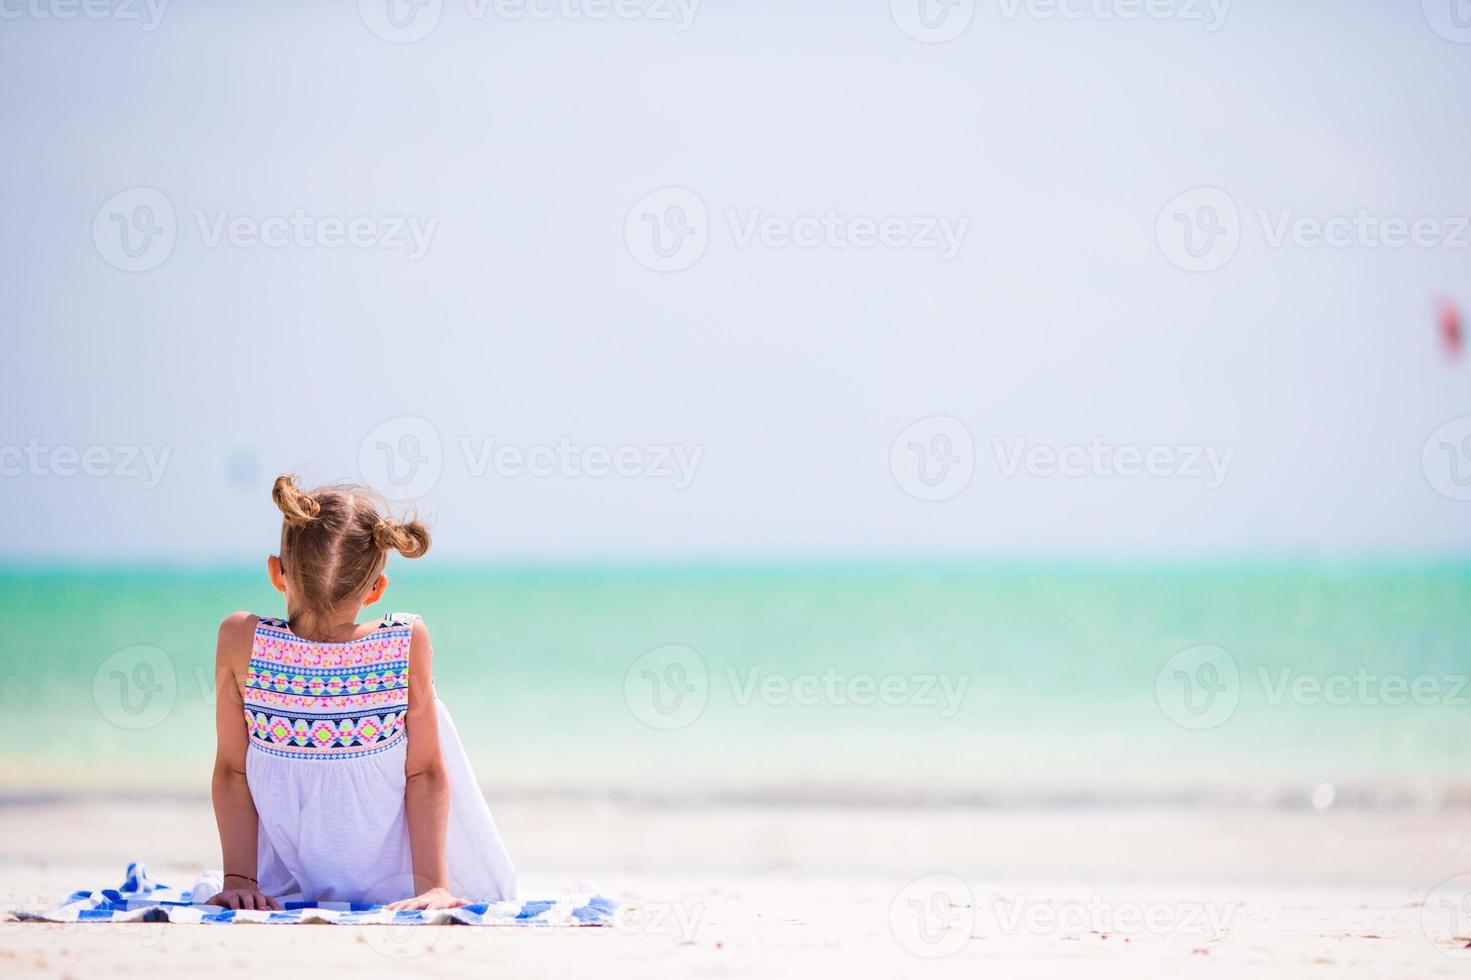 Cute little girl at beach during summer vacation photo